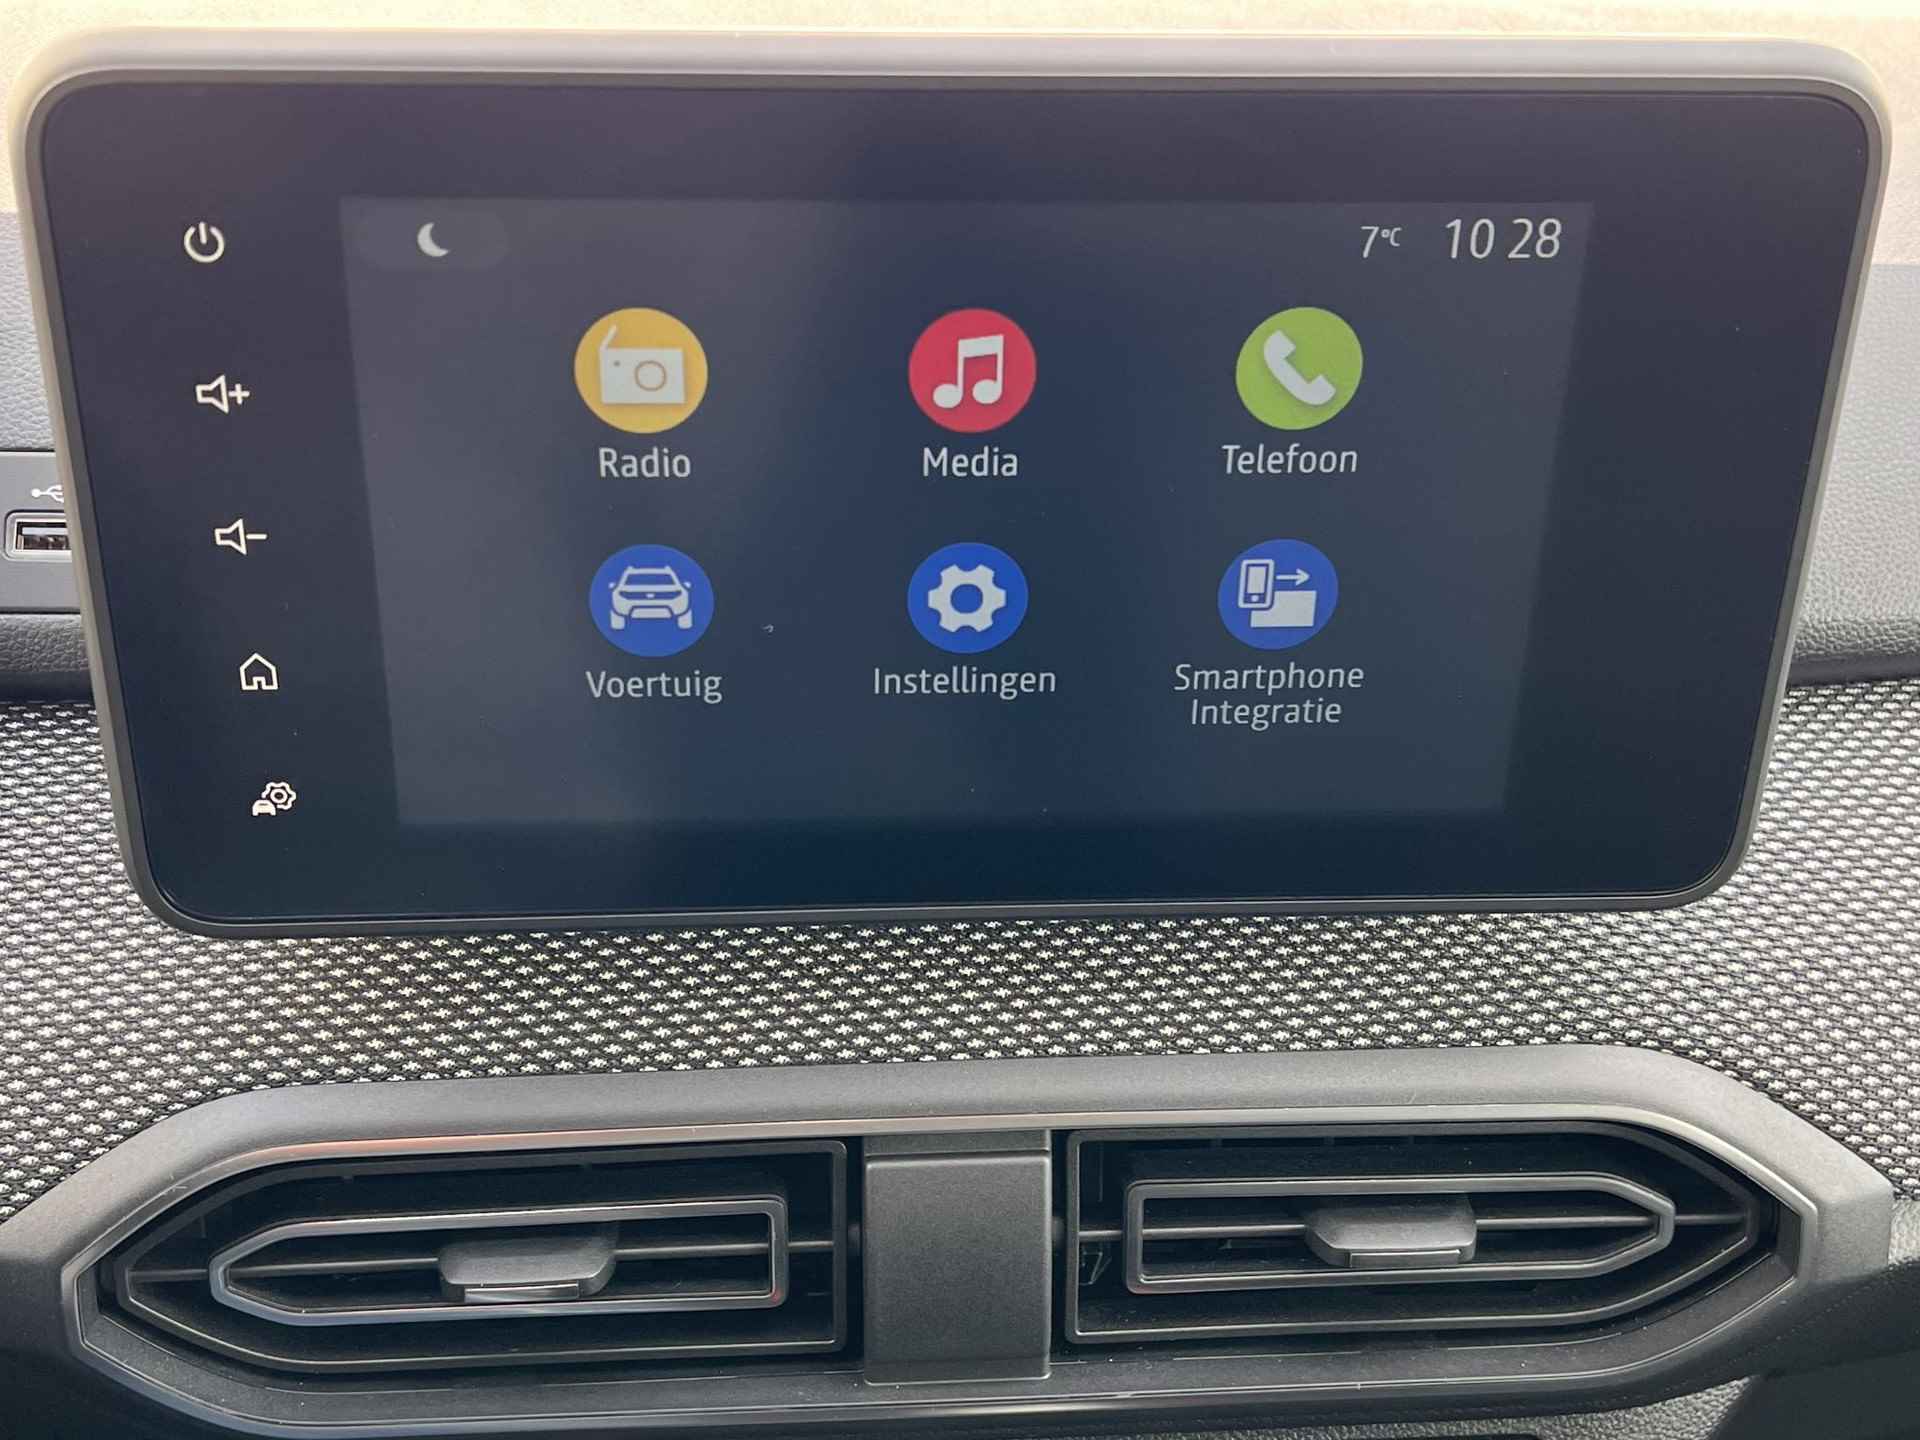 Dacia Jogger 1.0 TCe 110 Extreme 7p. / Zeven persoons / Navigatie via Apple Carplay of Android Auto / Stoelverwarming / - 17/49